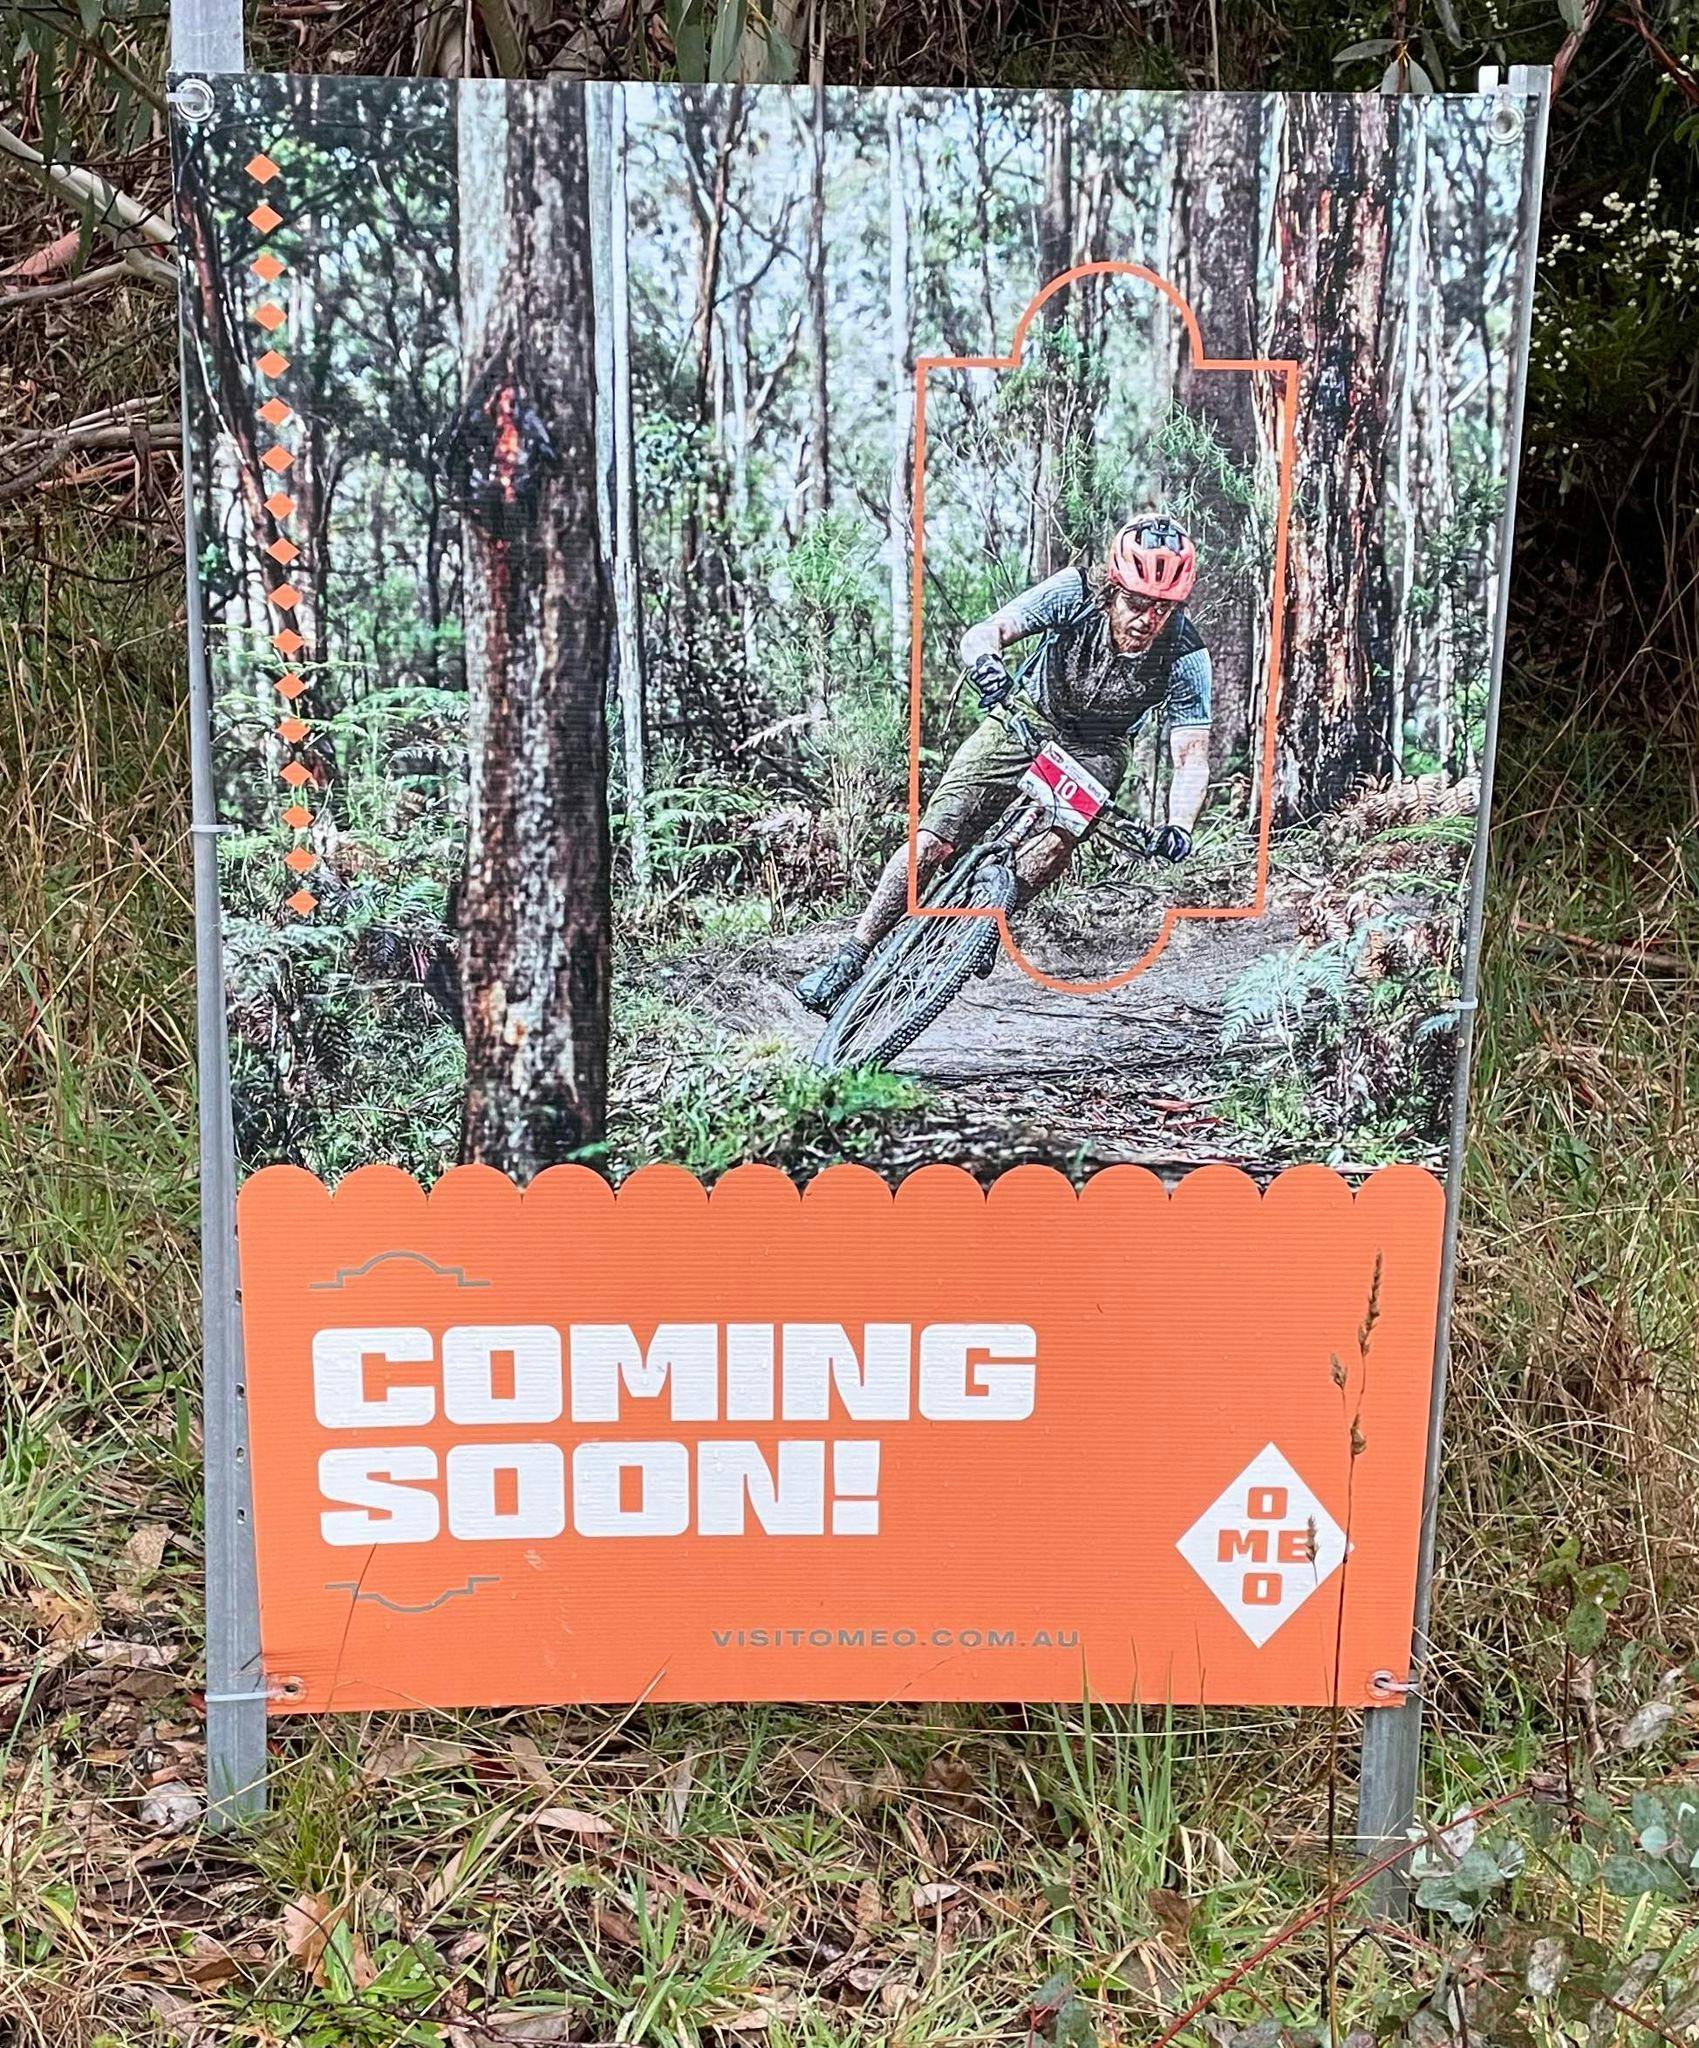 The Omeo MTB sign